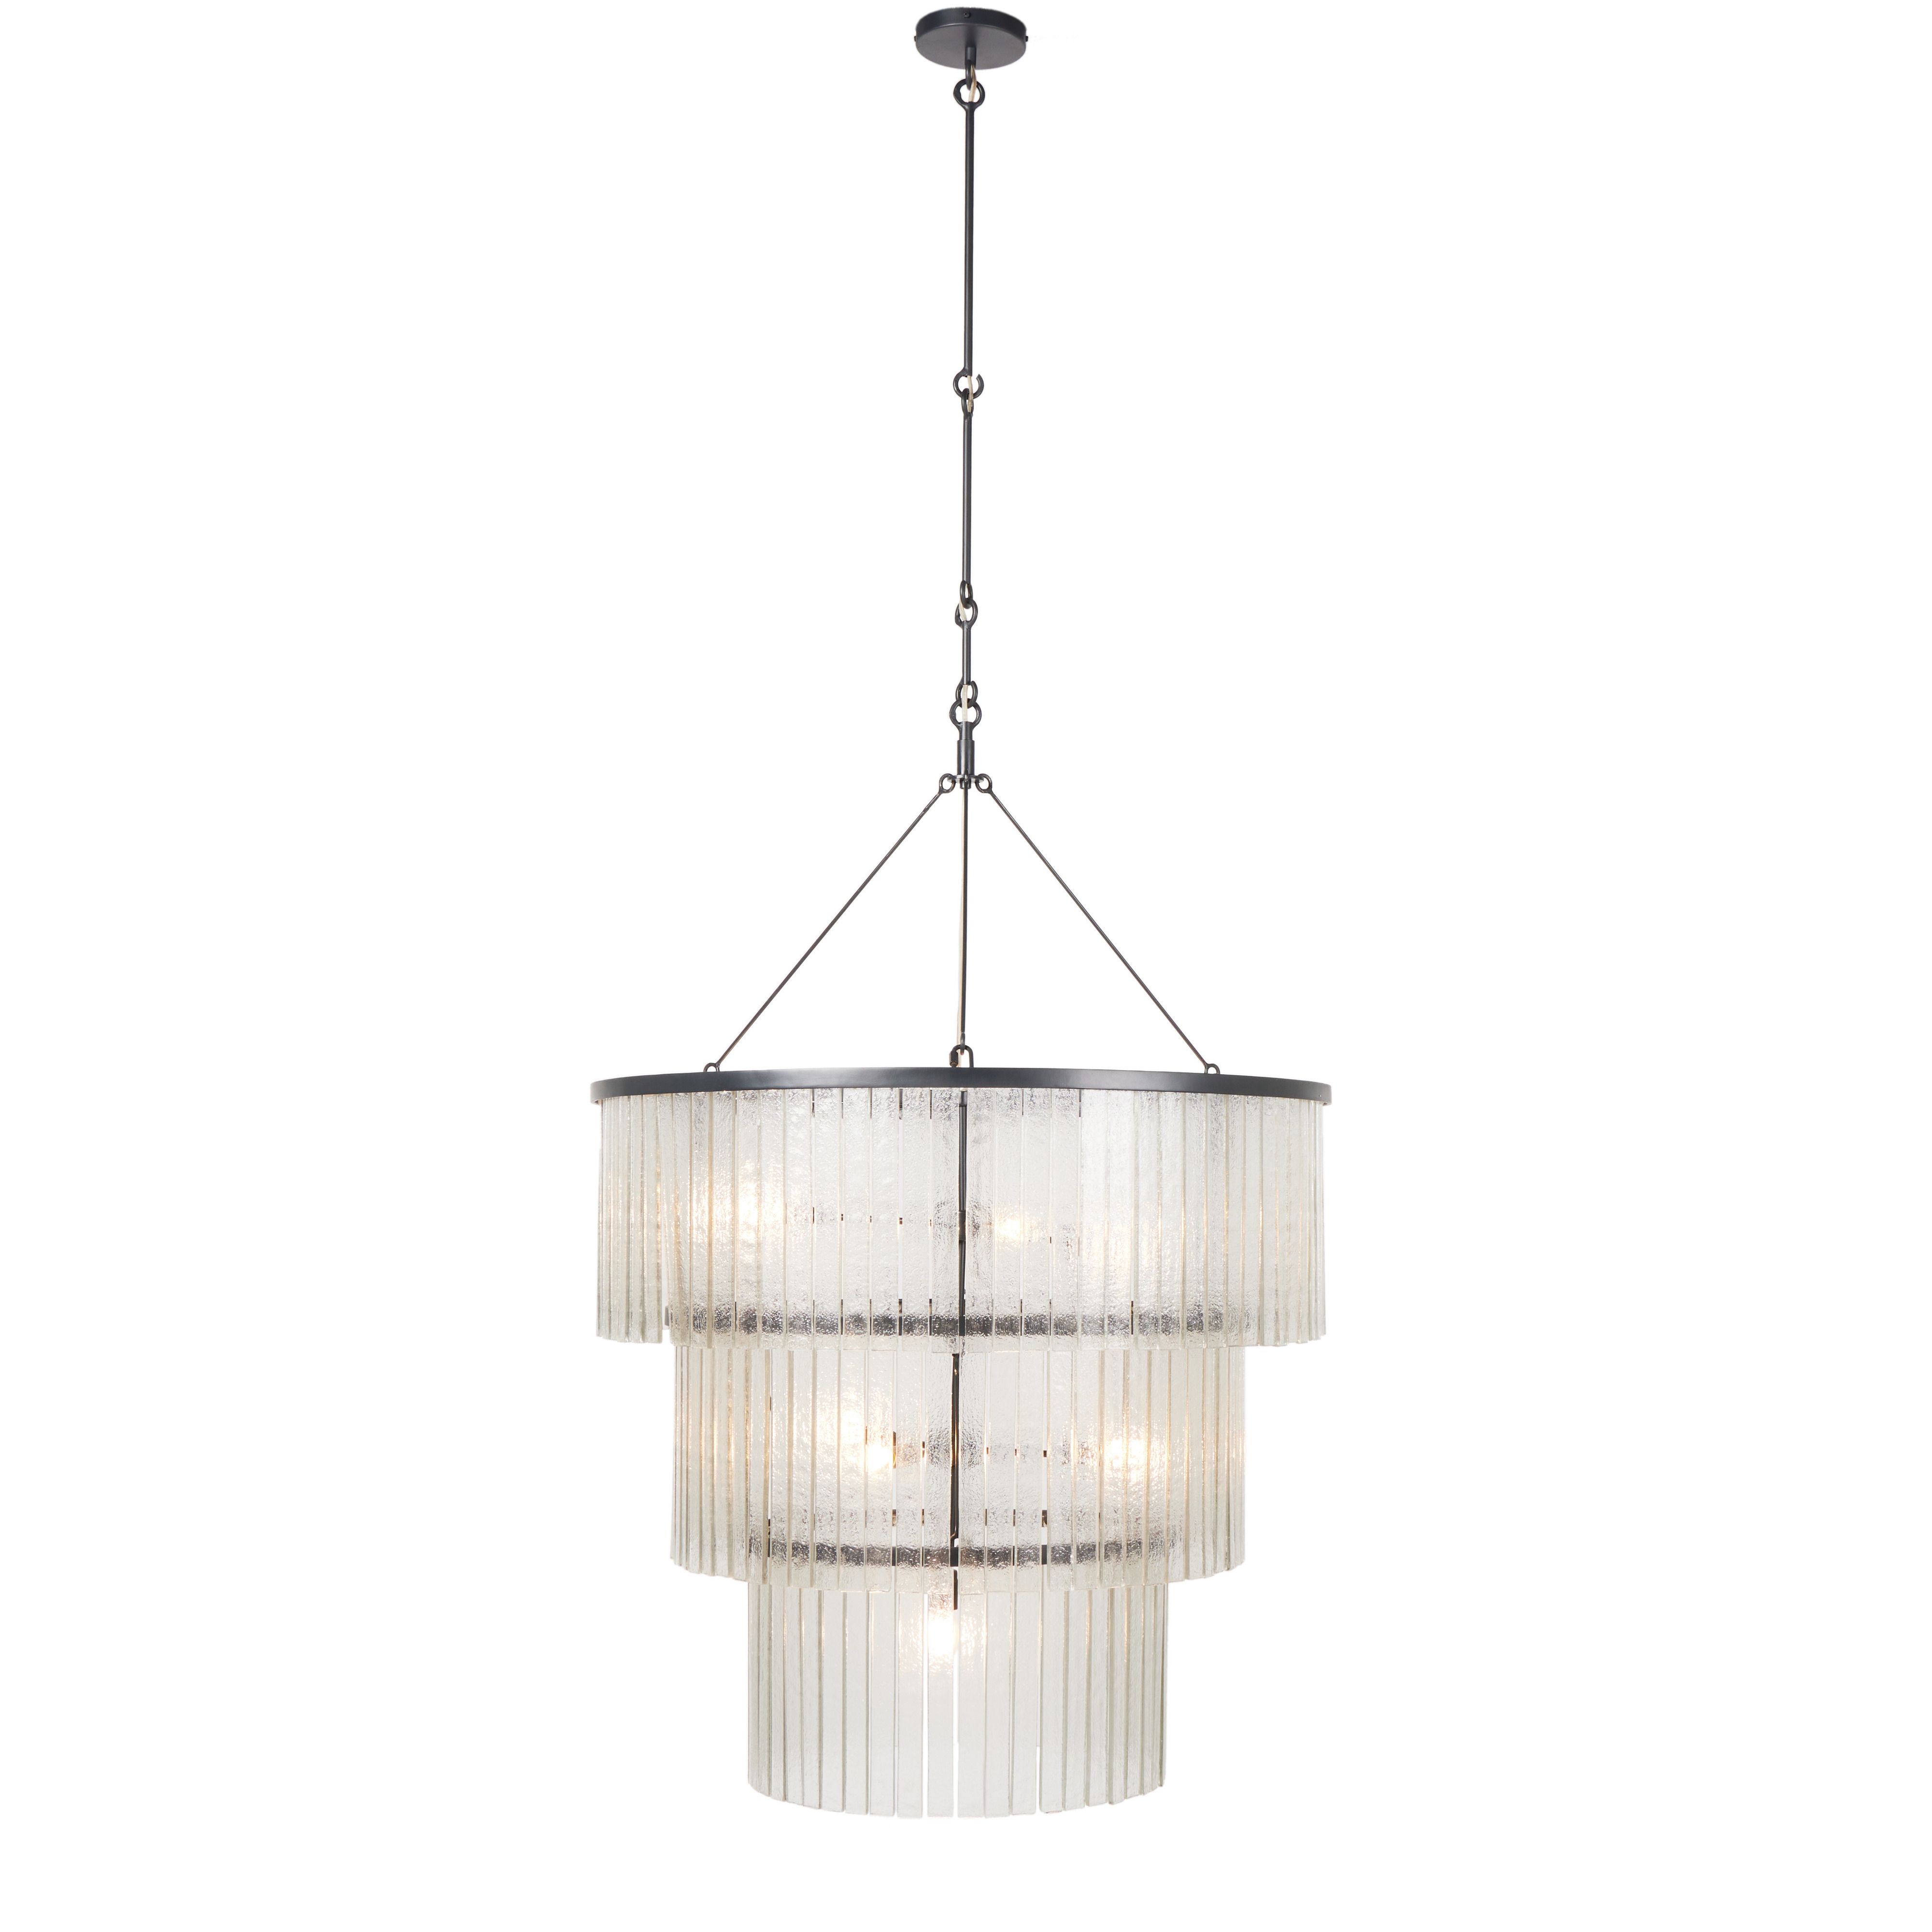 Meredith Large Chandelier-Clr Txt Glass - Image 2